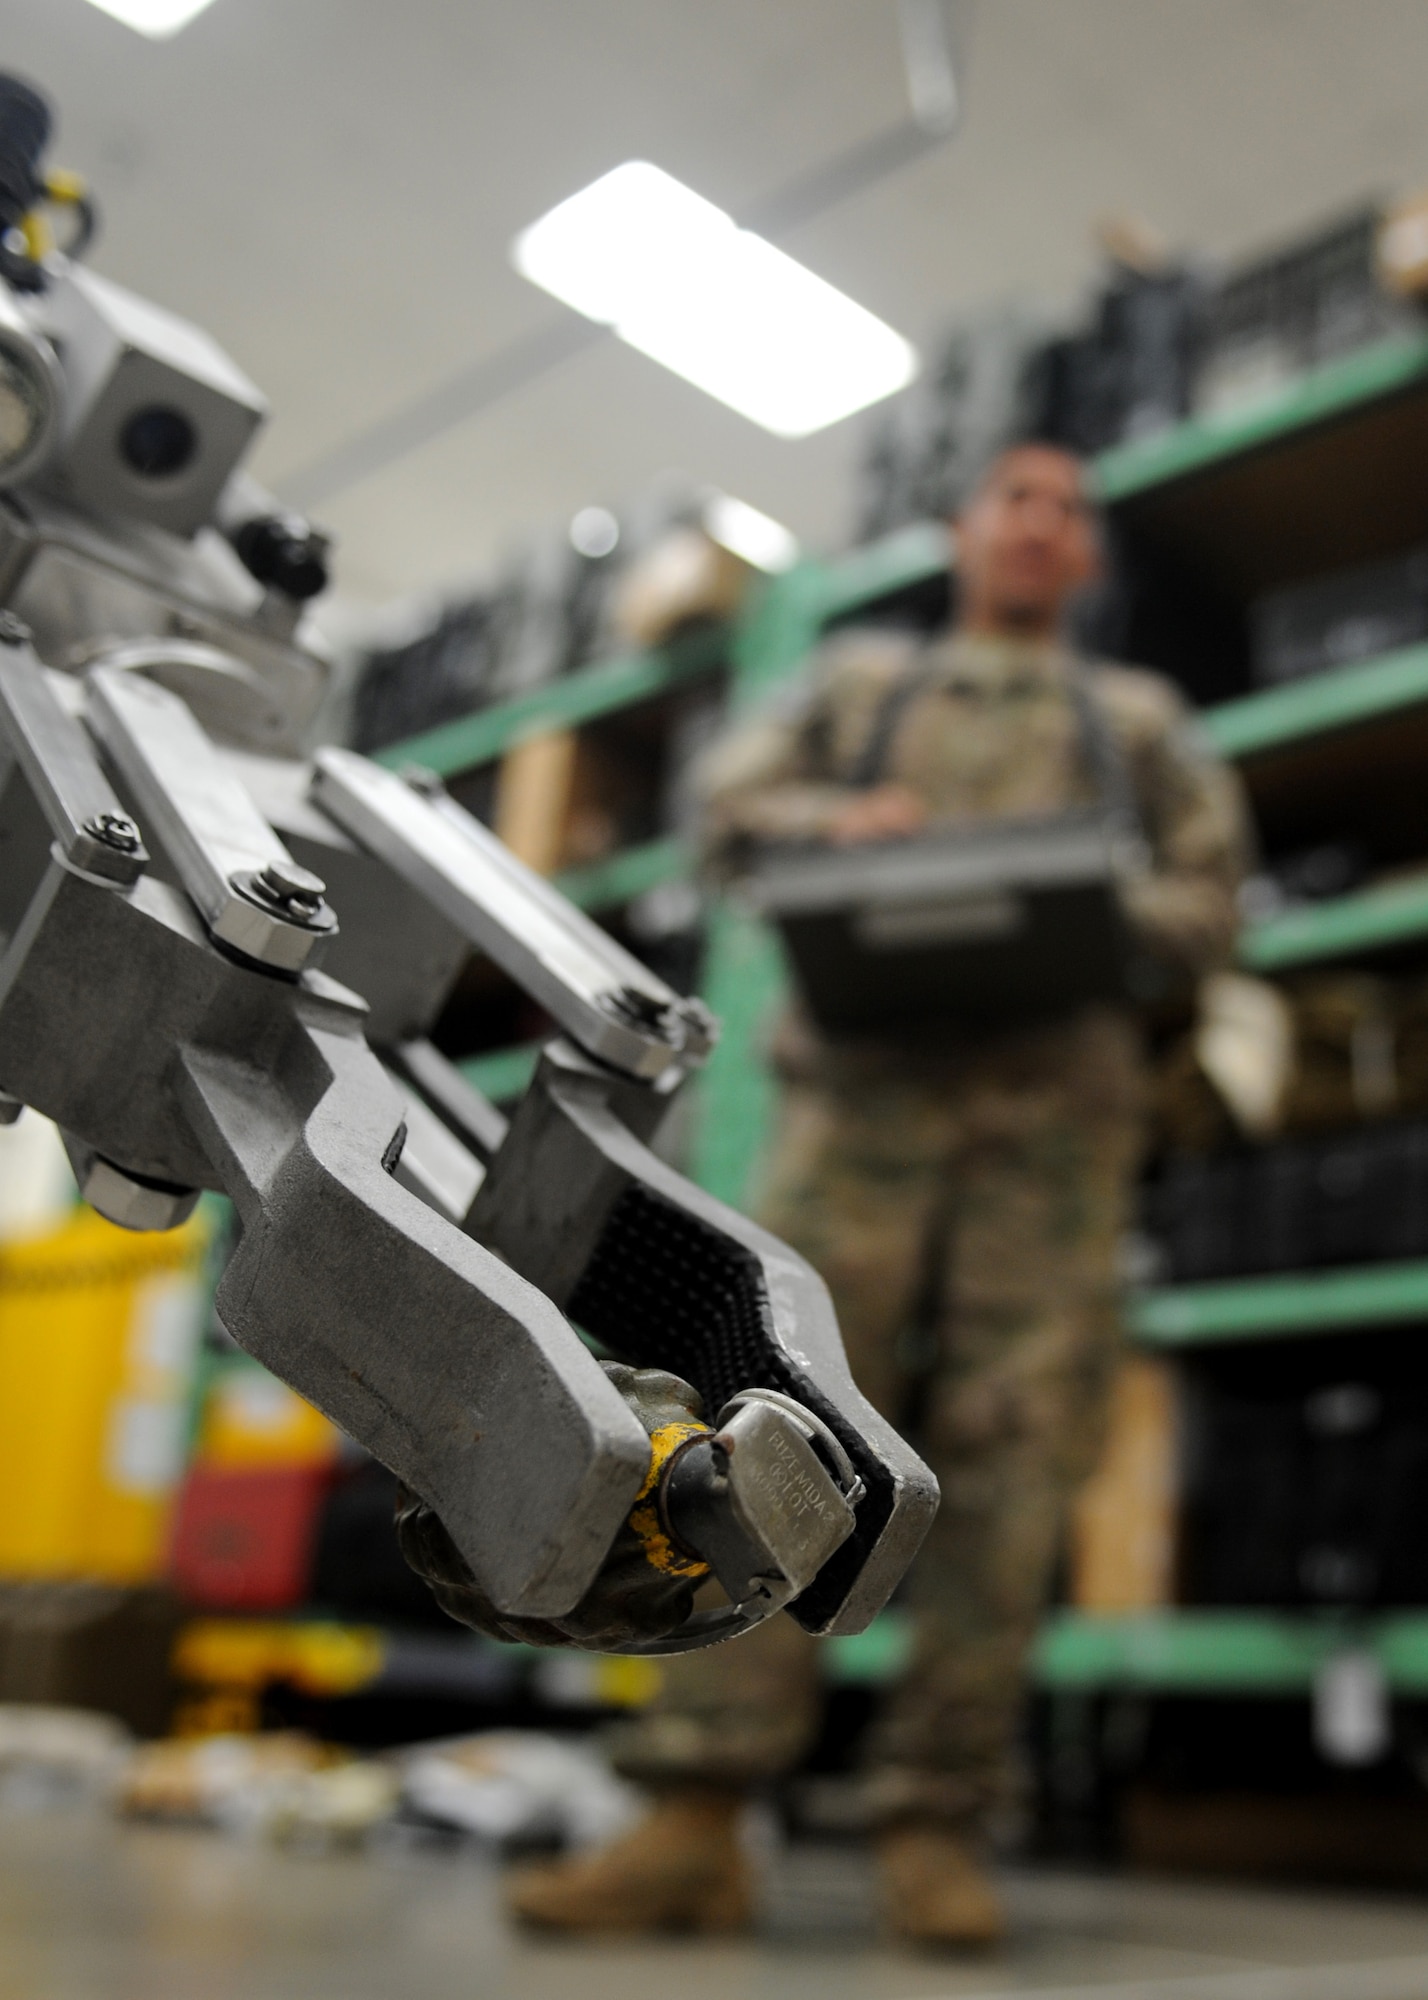 Airman 1st Class Andrew Perez, 28th Civil Engineer Squadron explosive ordnance disposal technician, uses an F-6 Alpha reconnaissance robot to pick up an inert fragmentation grenade at Ellsworth Air Force Base, S.D., Oct. 6, 2015. Depending on the length of the robot’s arm, it can carry up to 45 pounds and drag up to 150 pounds. (U.S. Air Force photo by Airman Sadie Colbert/Released)